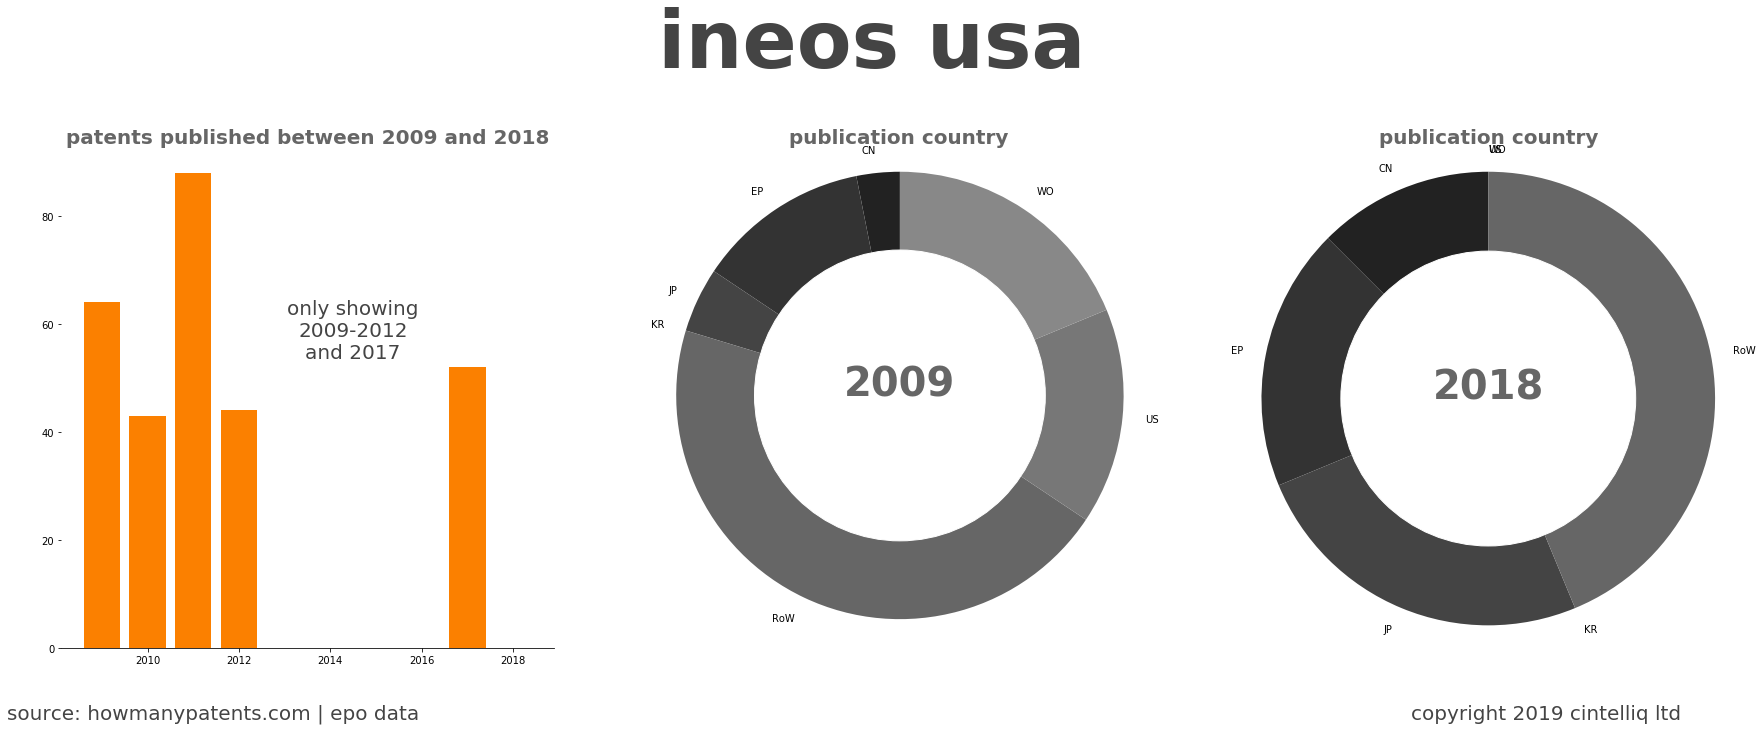 summary of patents for Ineos Usa